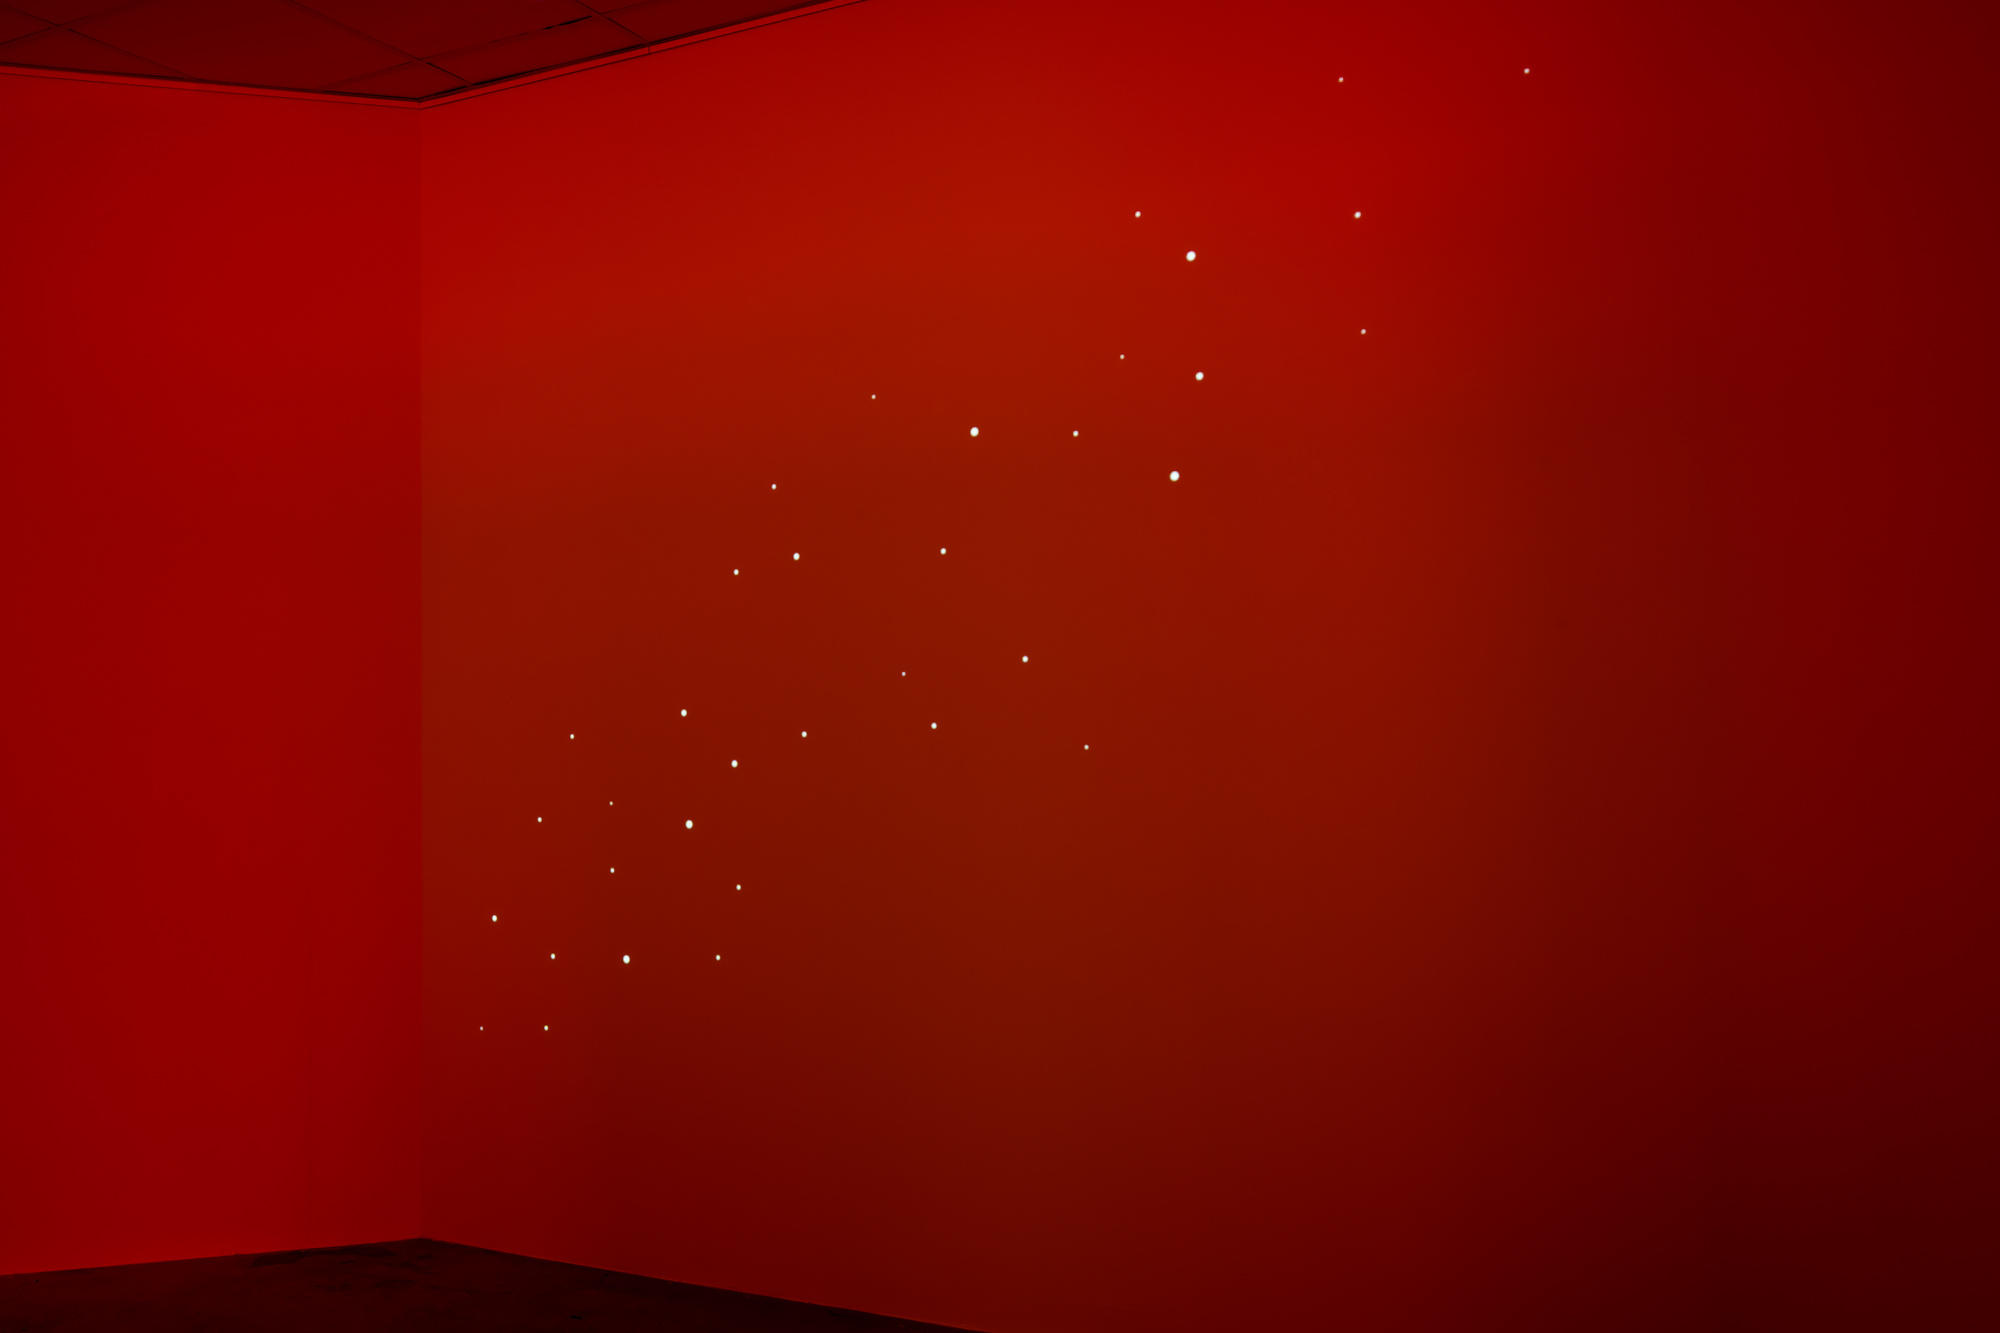 Installation view: 'We touch the sun, stars and everywhere at once' single channel projection